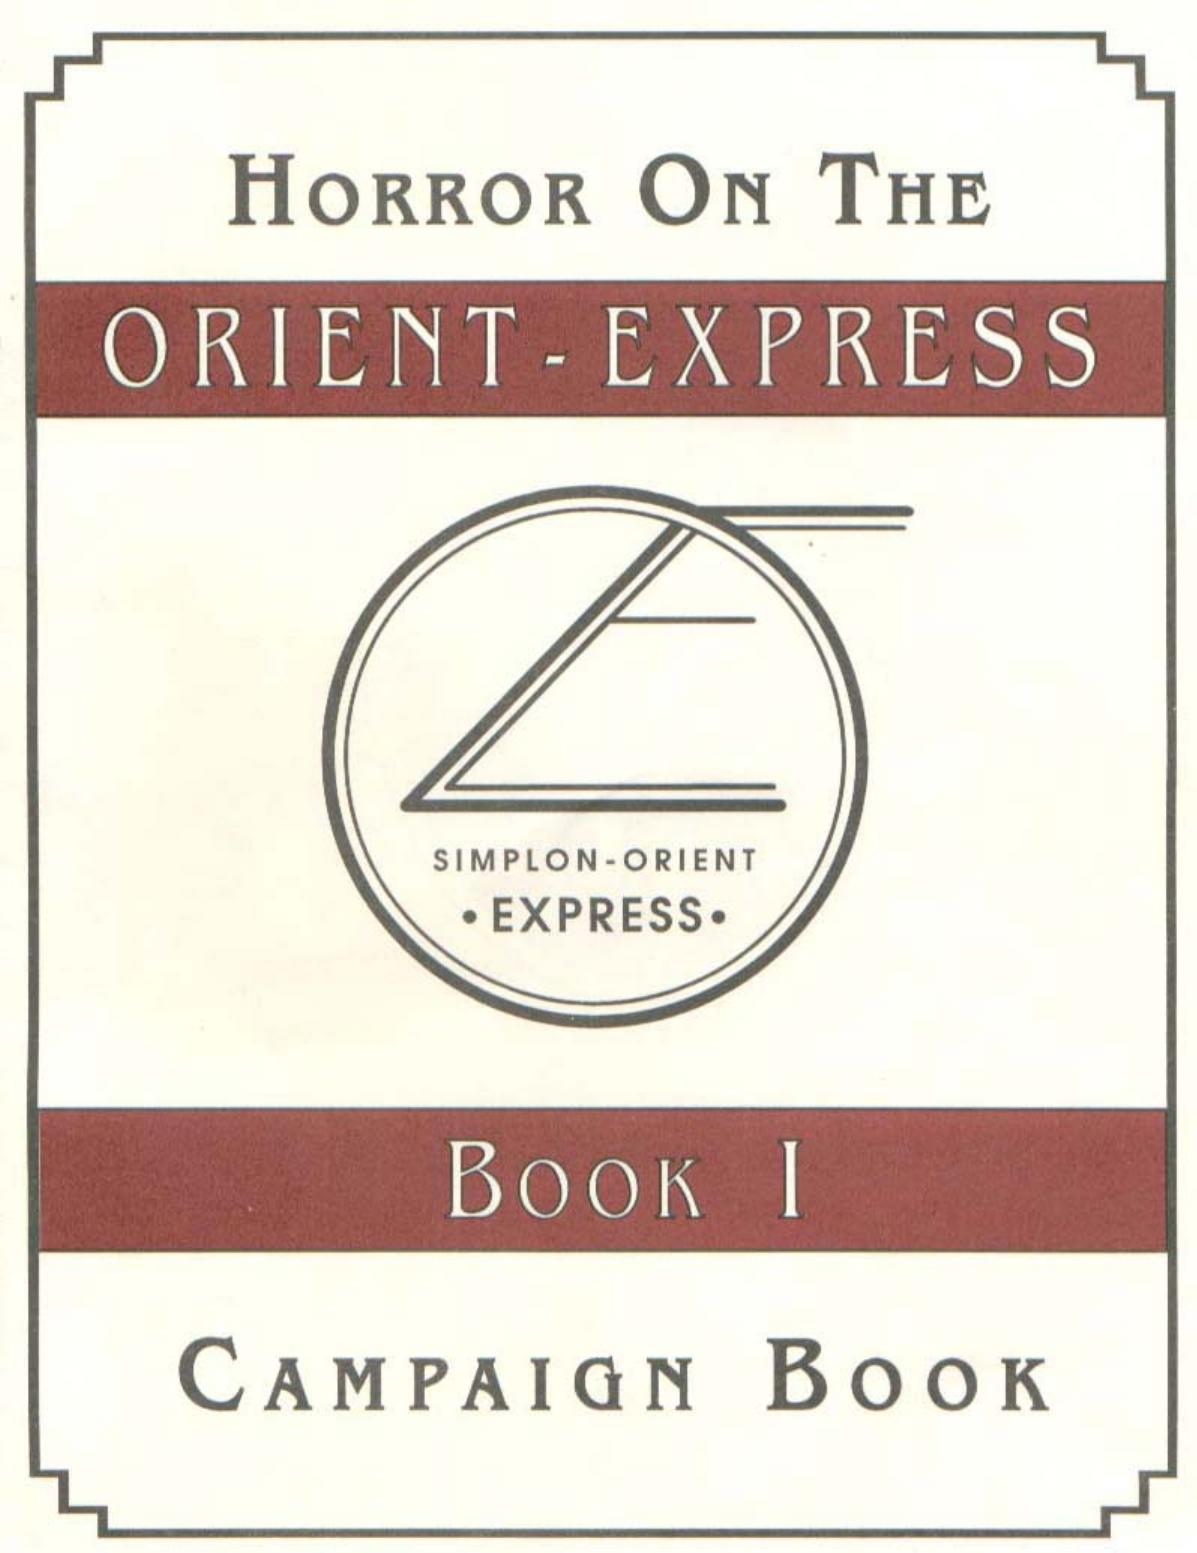 CoC Horror on the Orient Express Book 1